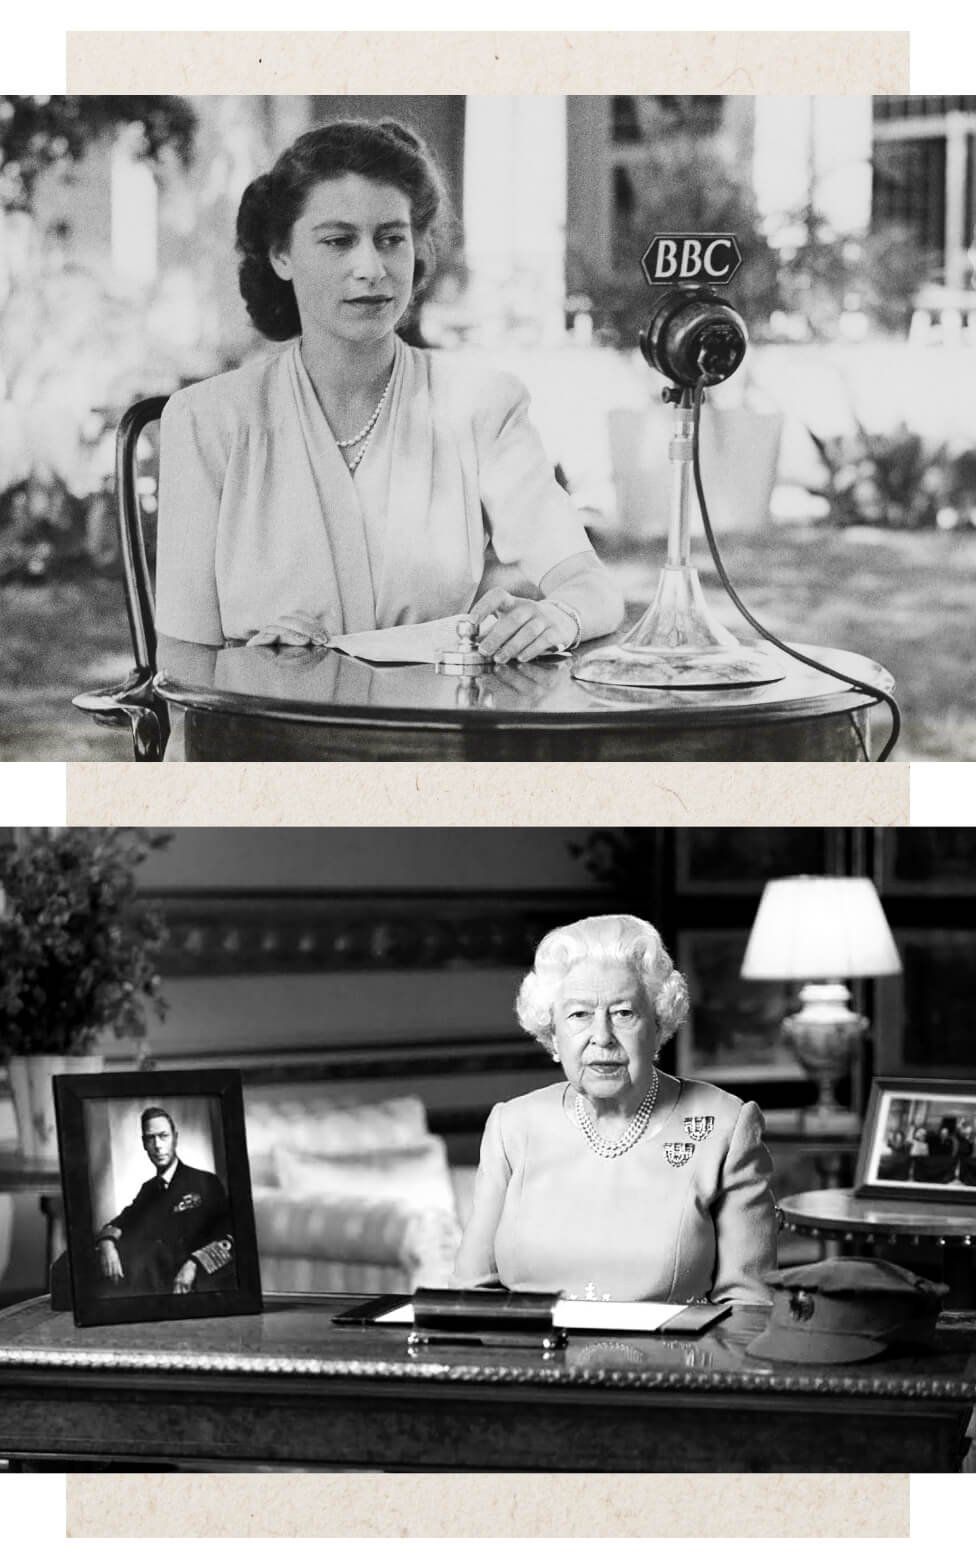 Death of Queen Elizabeth II The moment pic